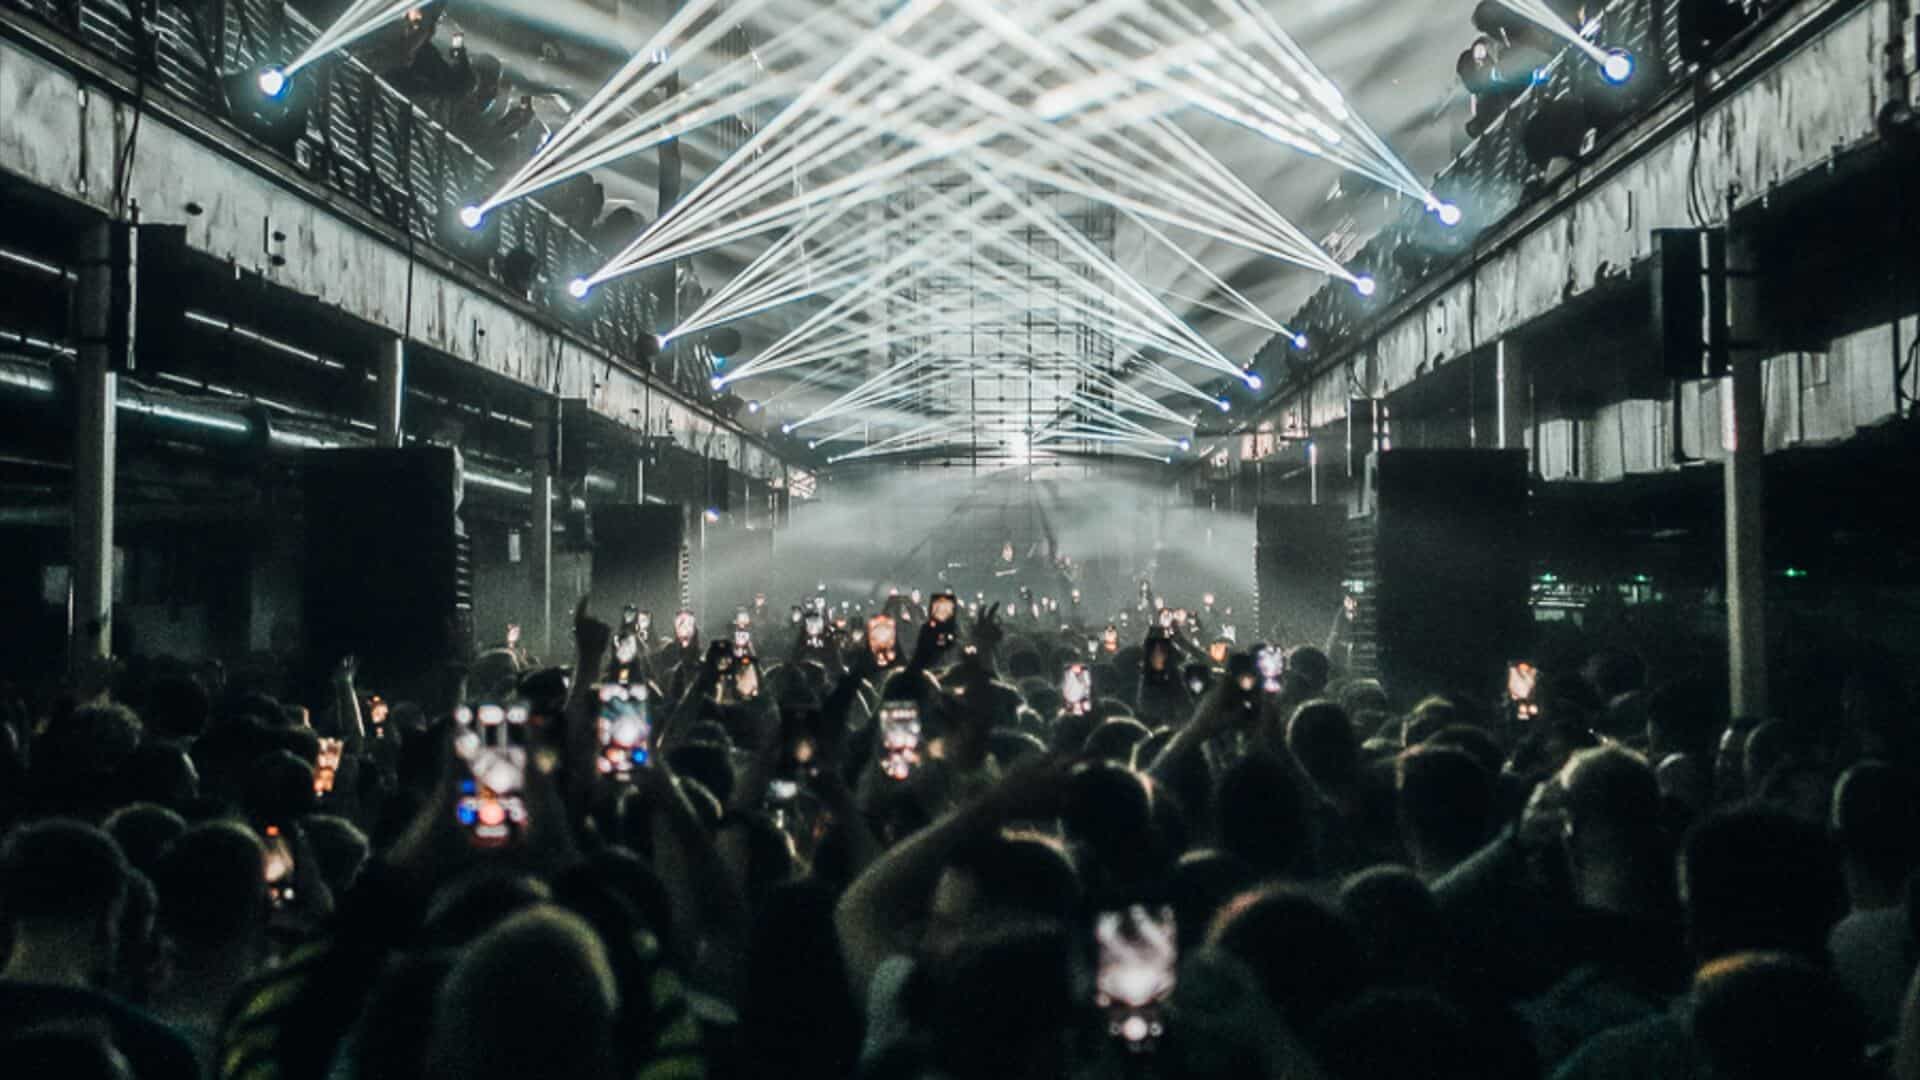 “Printworks 2.0” is looking to be launched in 2026